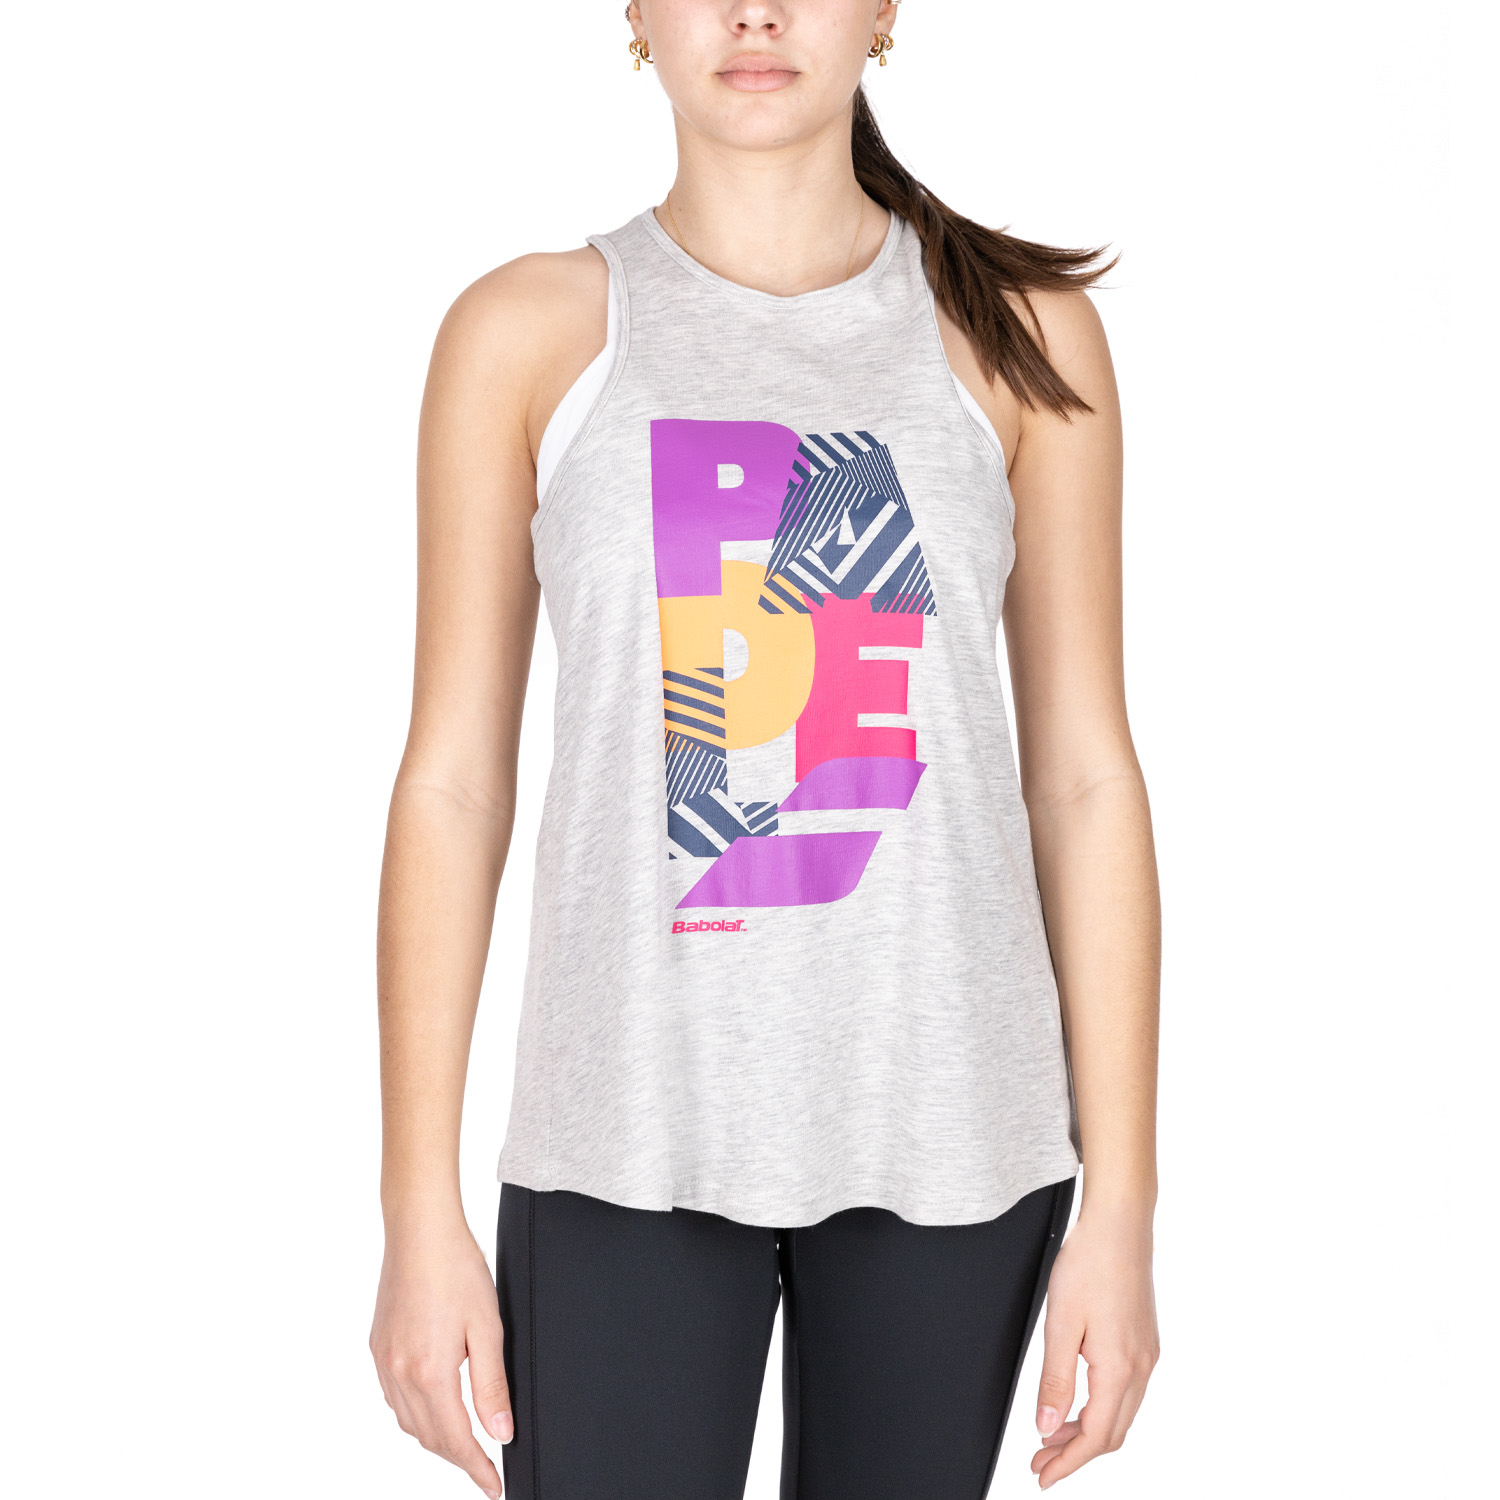 Babolat Graphic Top - High Rise Heather